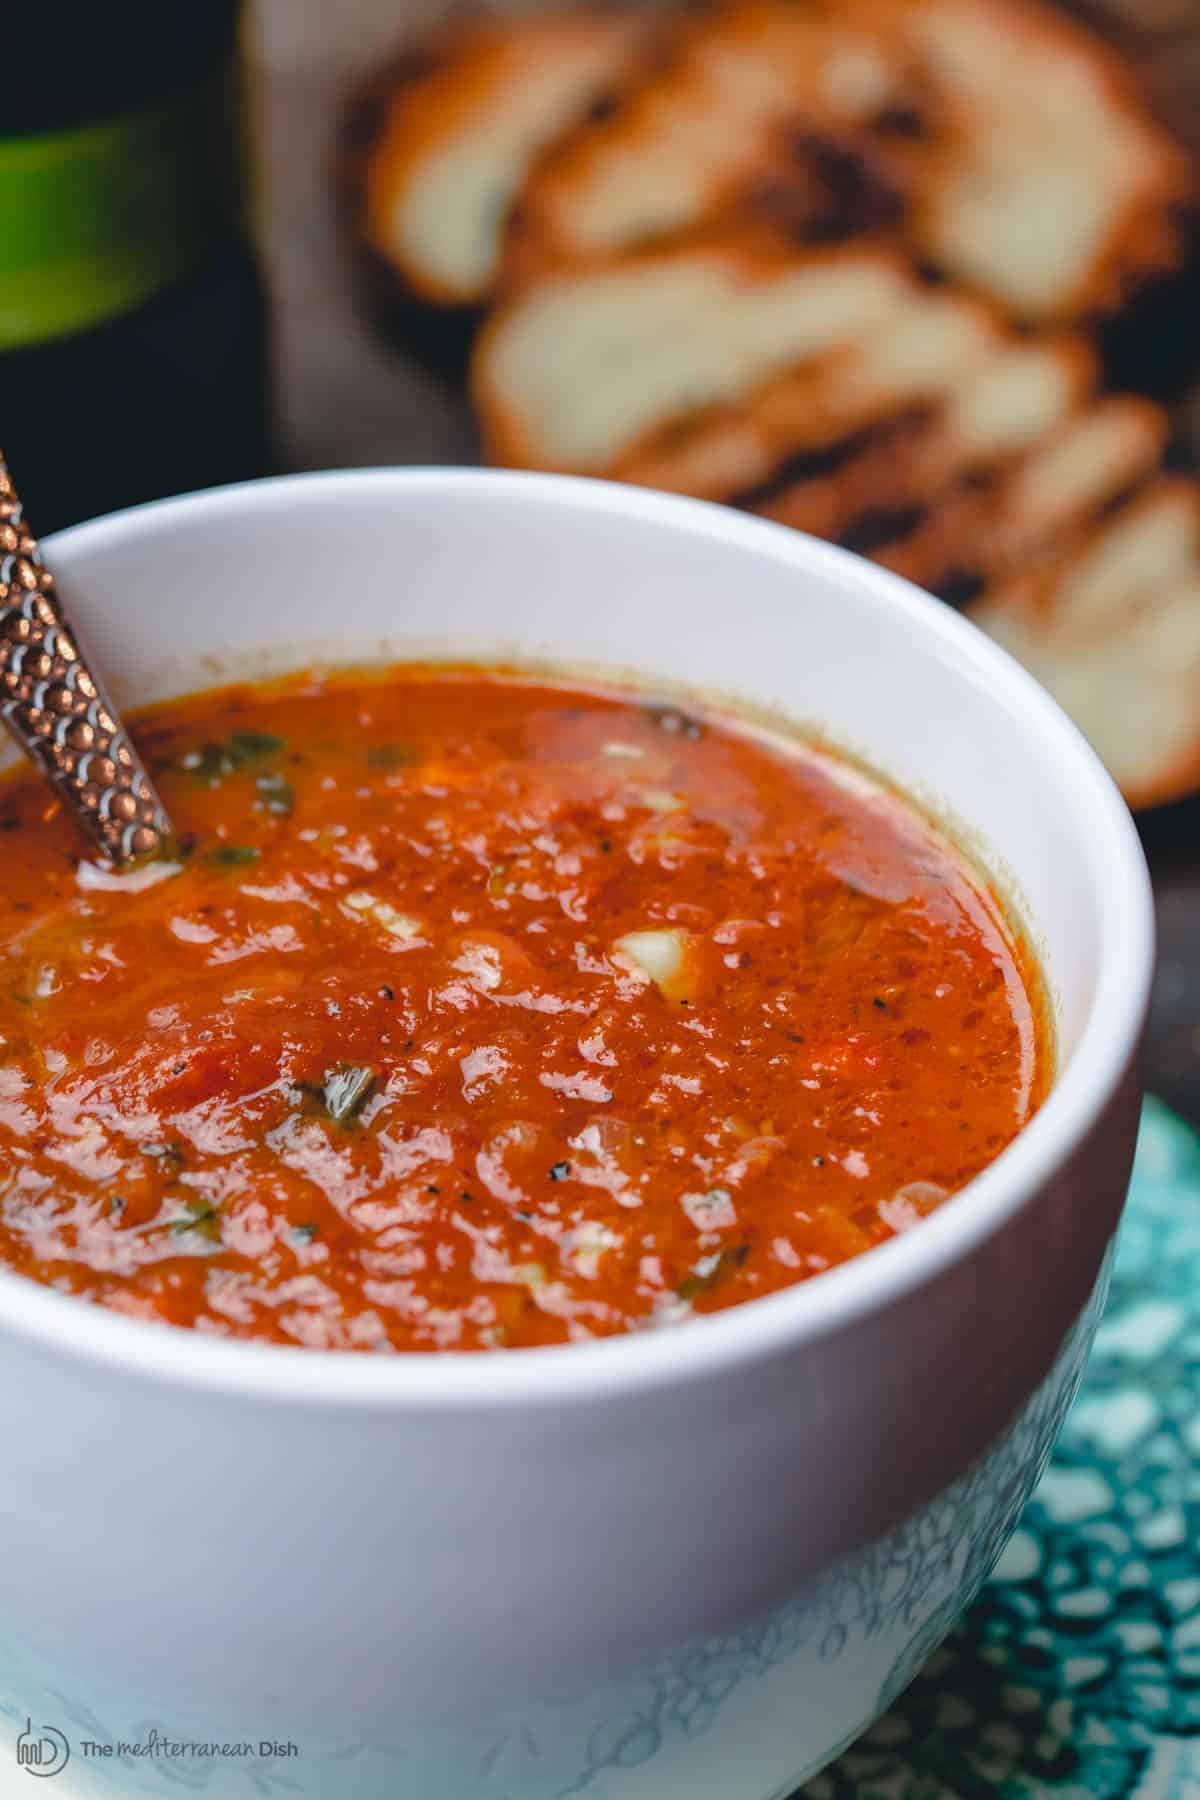 Roasted Tomato Basil Soup served in cups with grilled bread slices